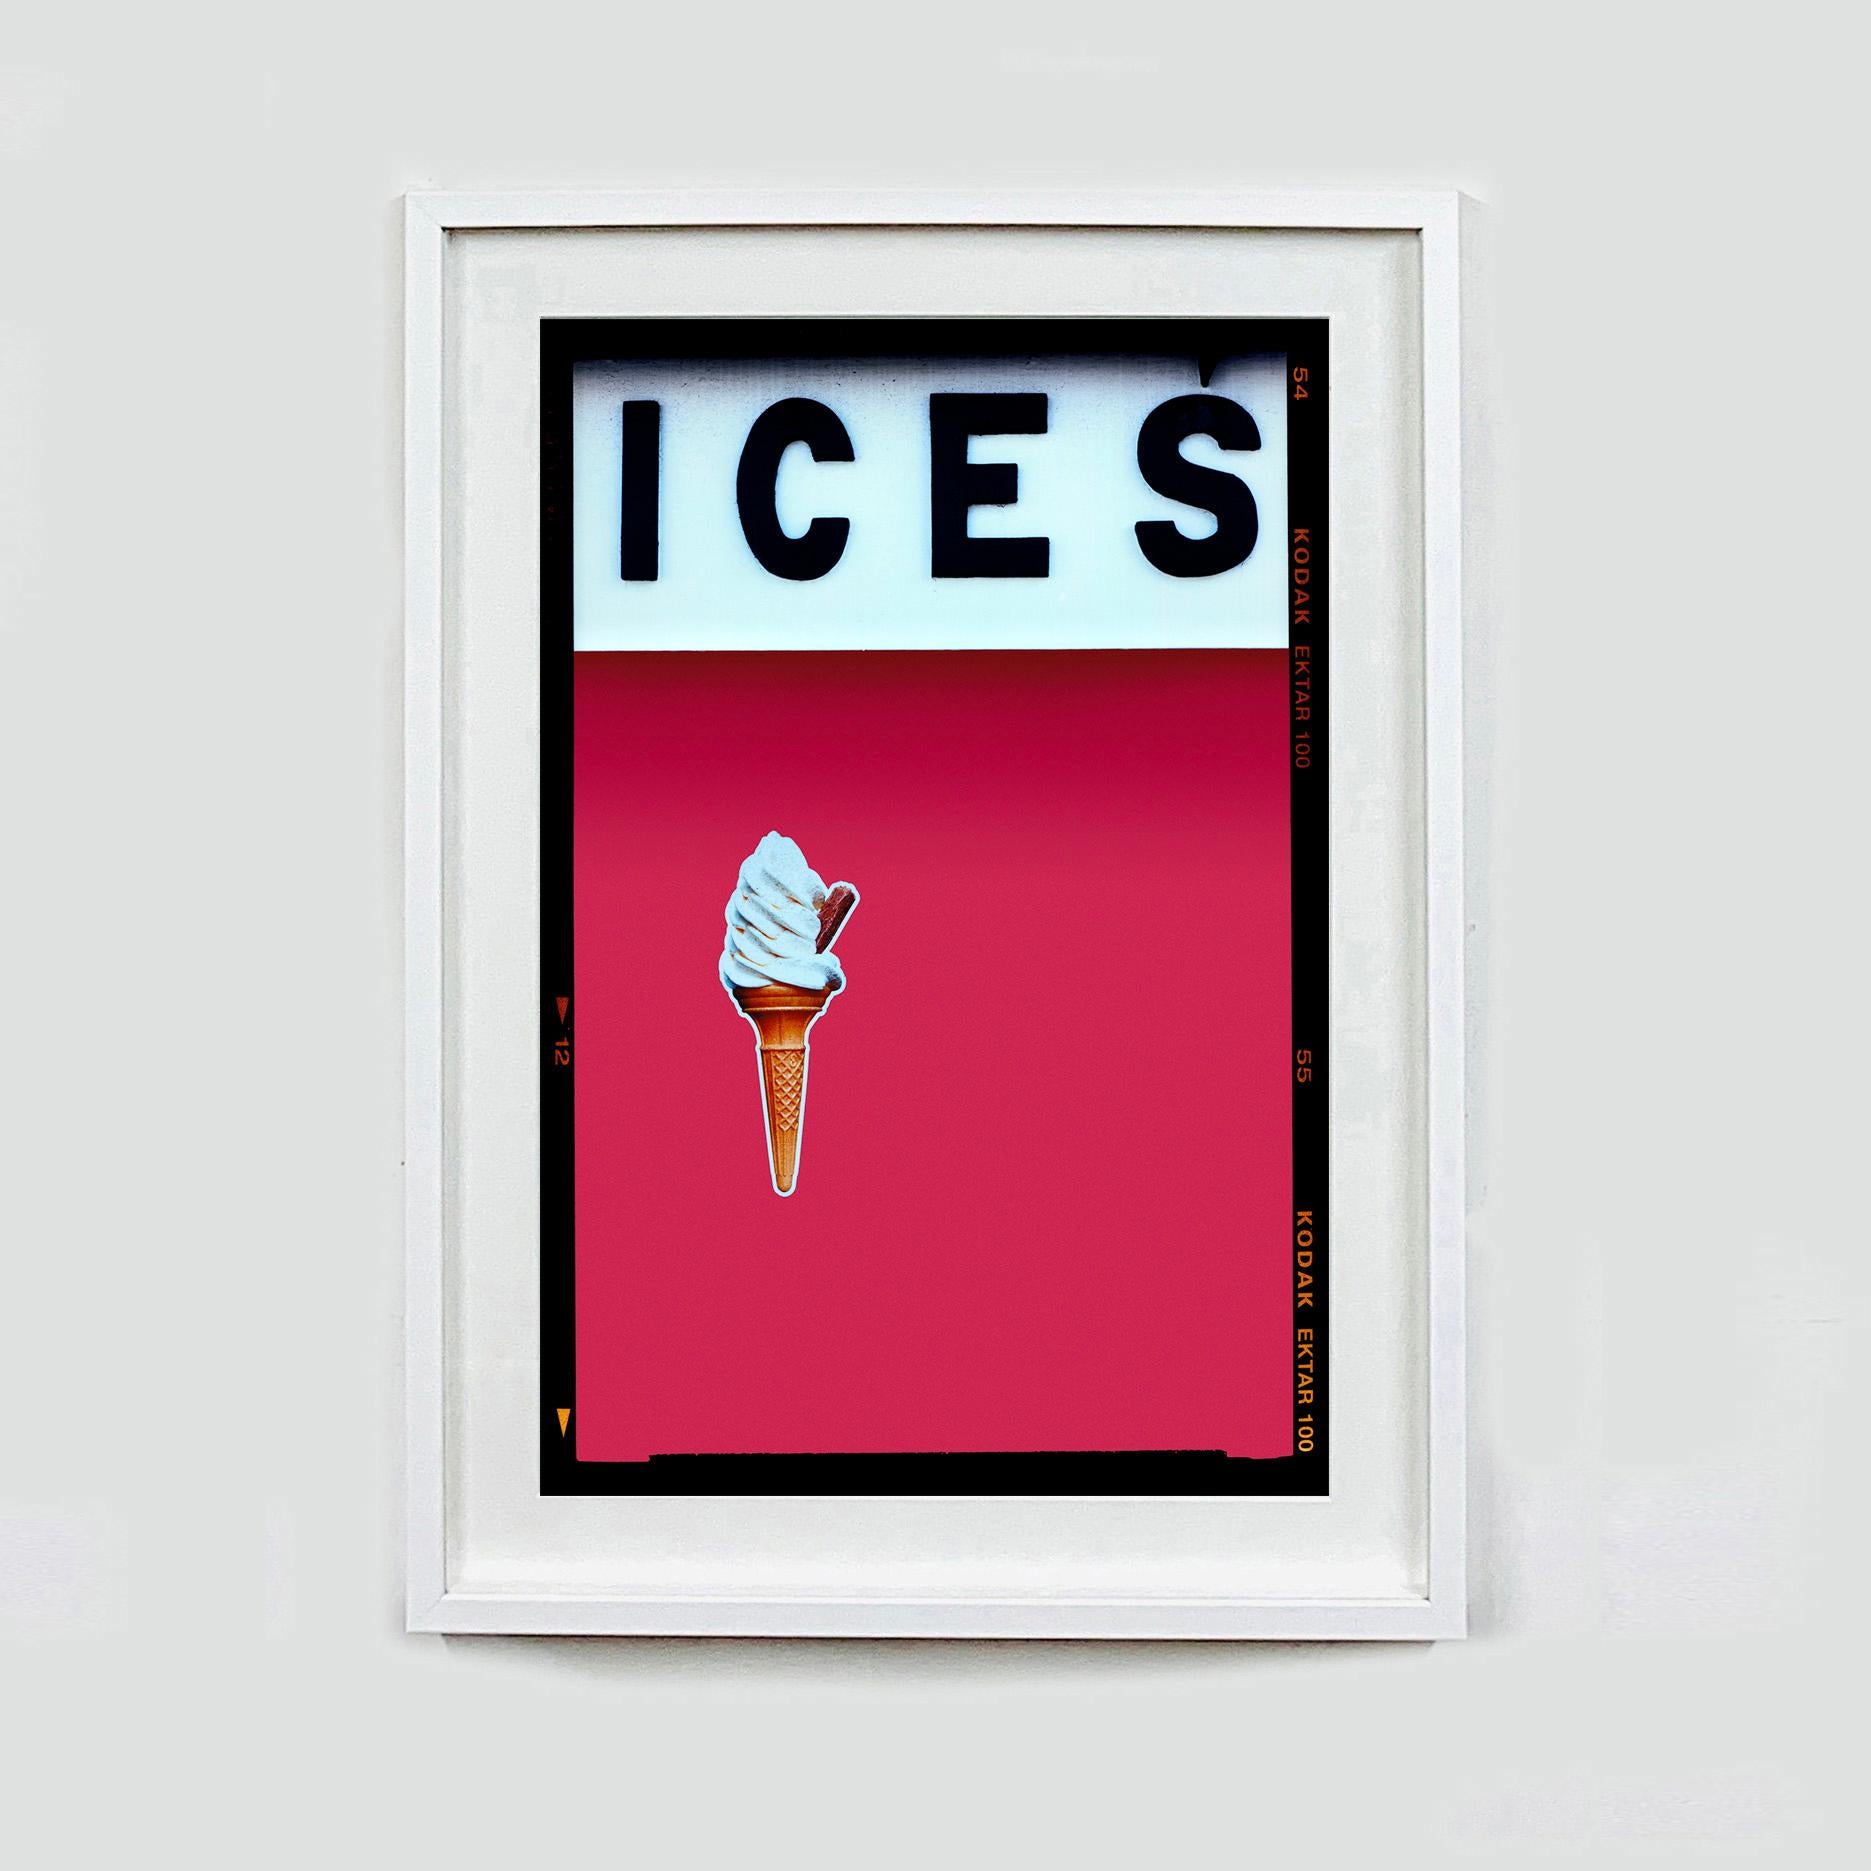 ICES Hues of Rouge- Four Framed Artworks - Pop Art Color Photography For Sale 1